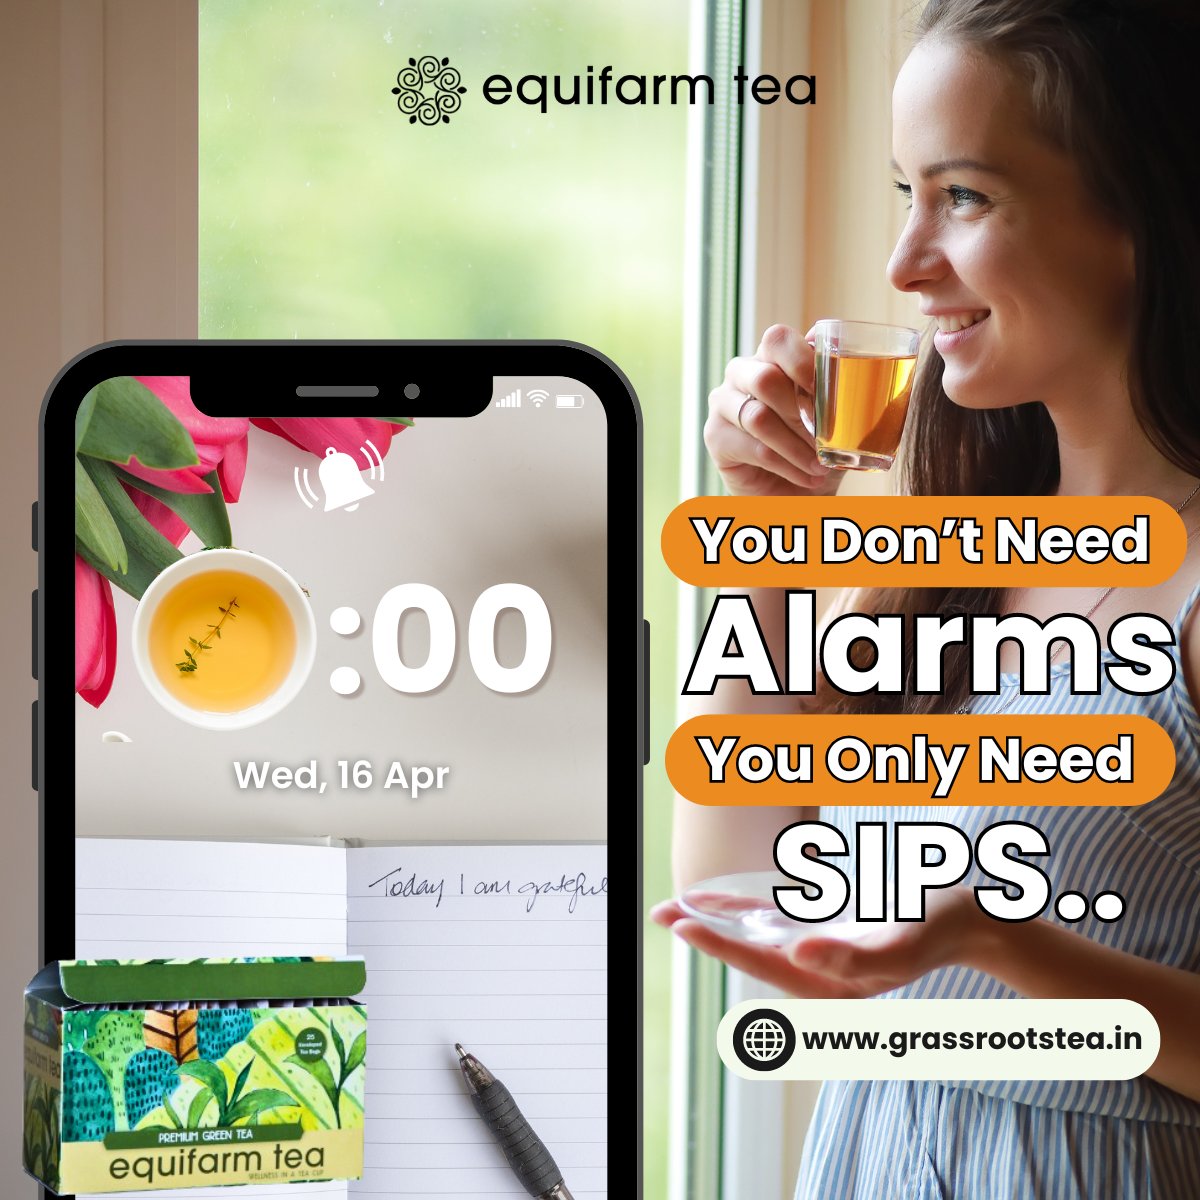 ☕Say hello to natural energy & goodbye to alarms! 
Start your mornings right with Equifarm Green Tea,
the perfect way to kickstart your day.
Buy: grassrootstea.in

#naturalenergy #healthyhabits #greentea #morningtea #richflavour #equifarmtea #vocalforfarmer #grassrootstea